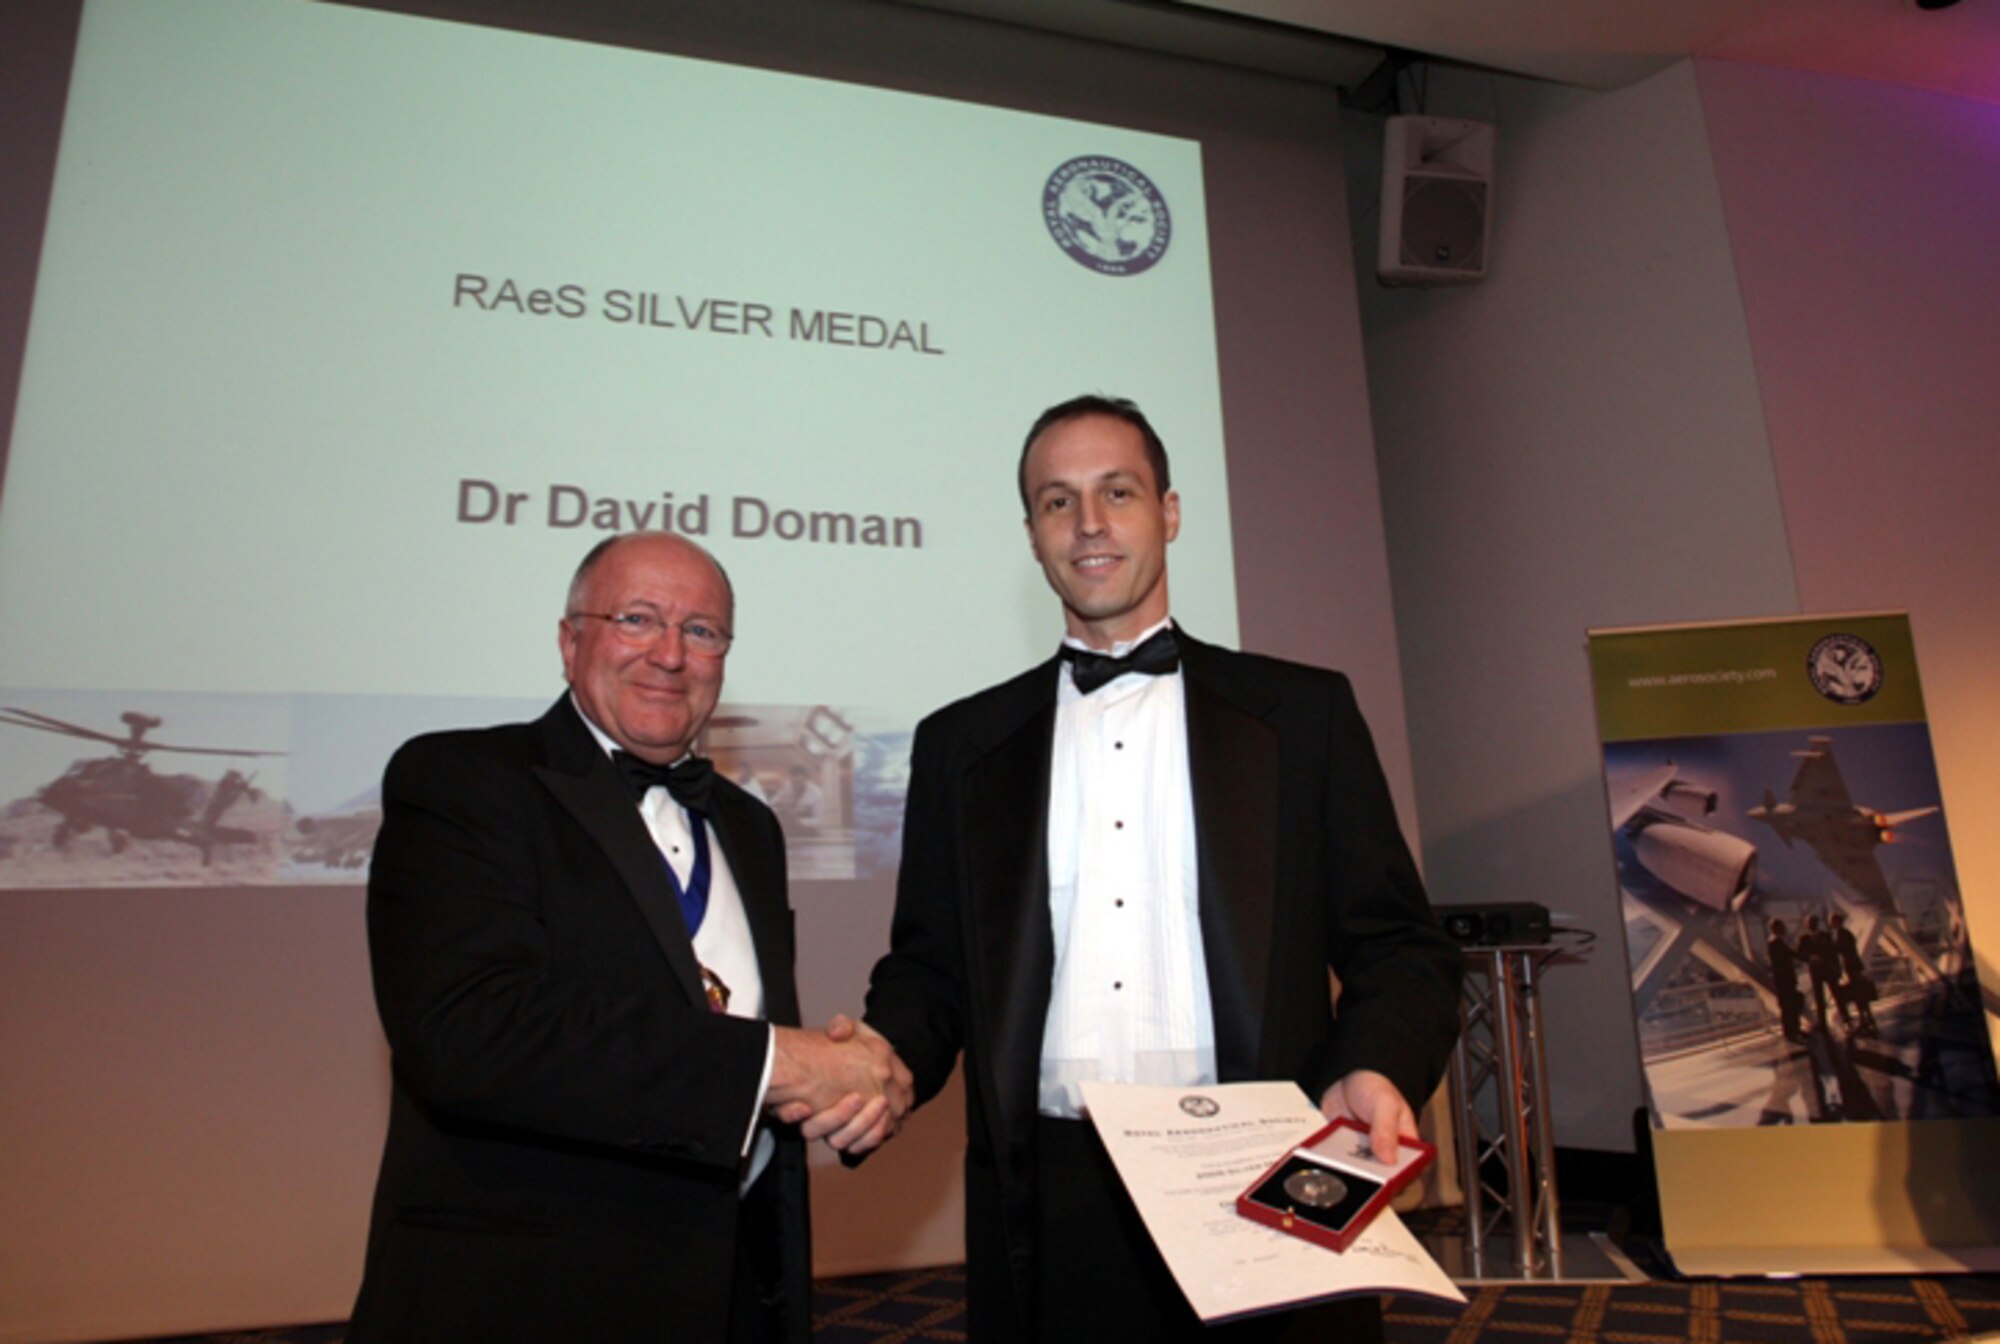 Dr. David Doman was presented the Royal Aeronautical Society (RAeS) Silver Medal on Dec. 11 at the Orville and Wilbur Wright Lecture in London.  Dr. Doman is a hypersonics scientist with the Air Force Research Laboratory. (Courtesy photo/RAeS)